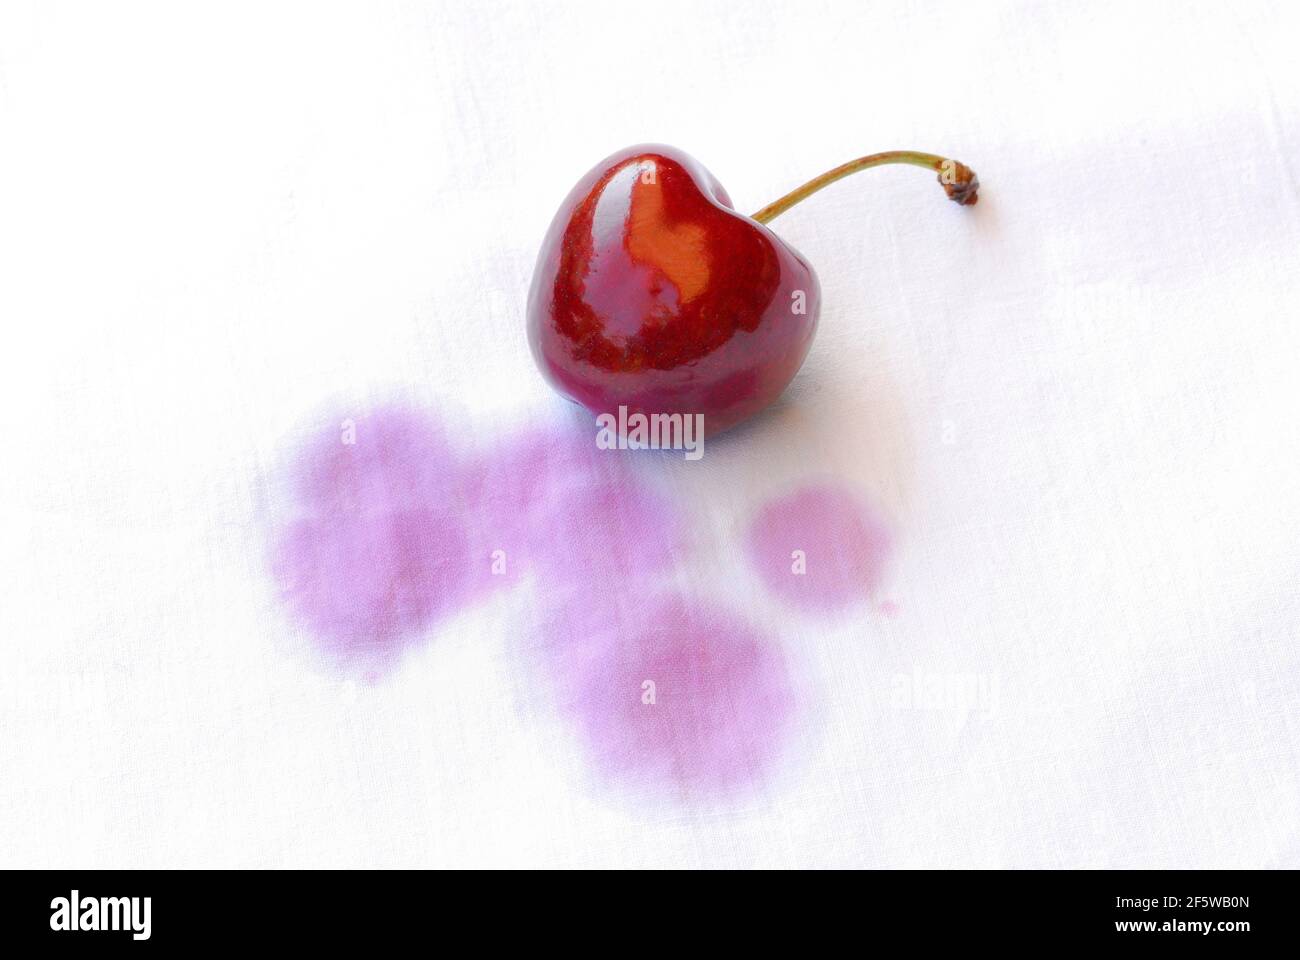 Stain, stains, cherry stain on fabric, cherry stain, cherry, cherry Stock Photo